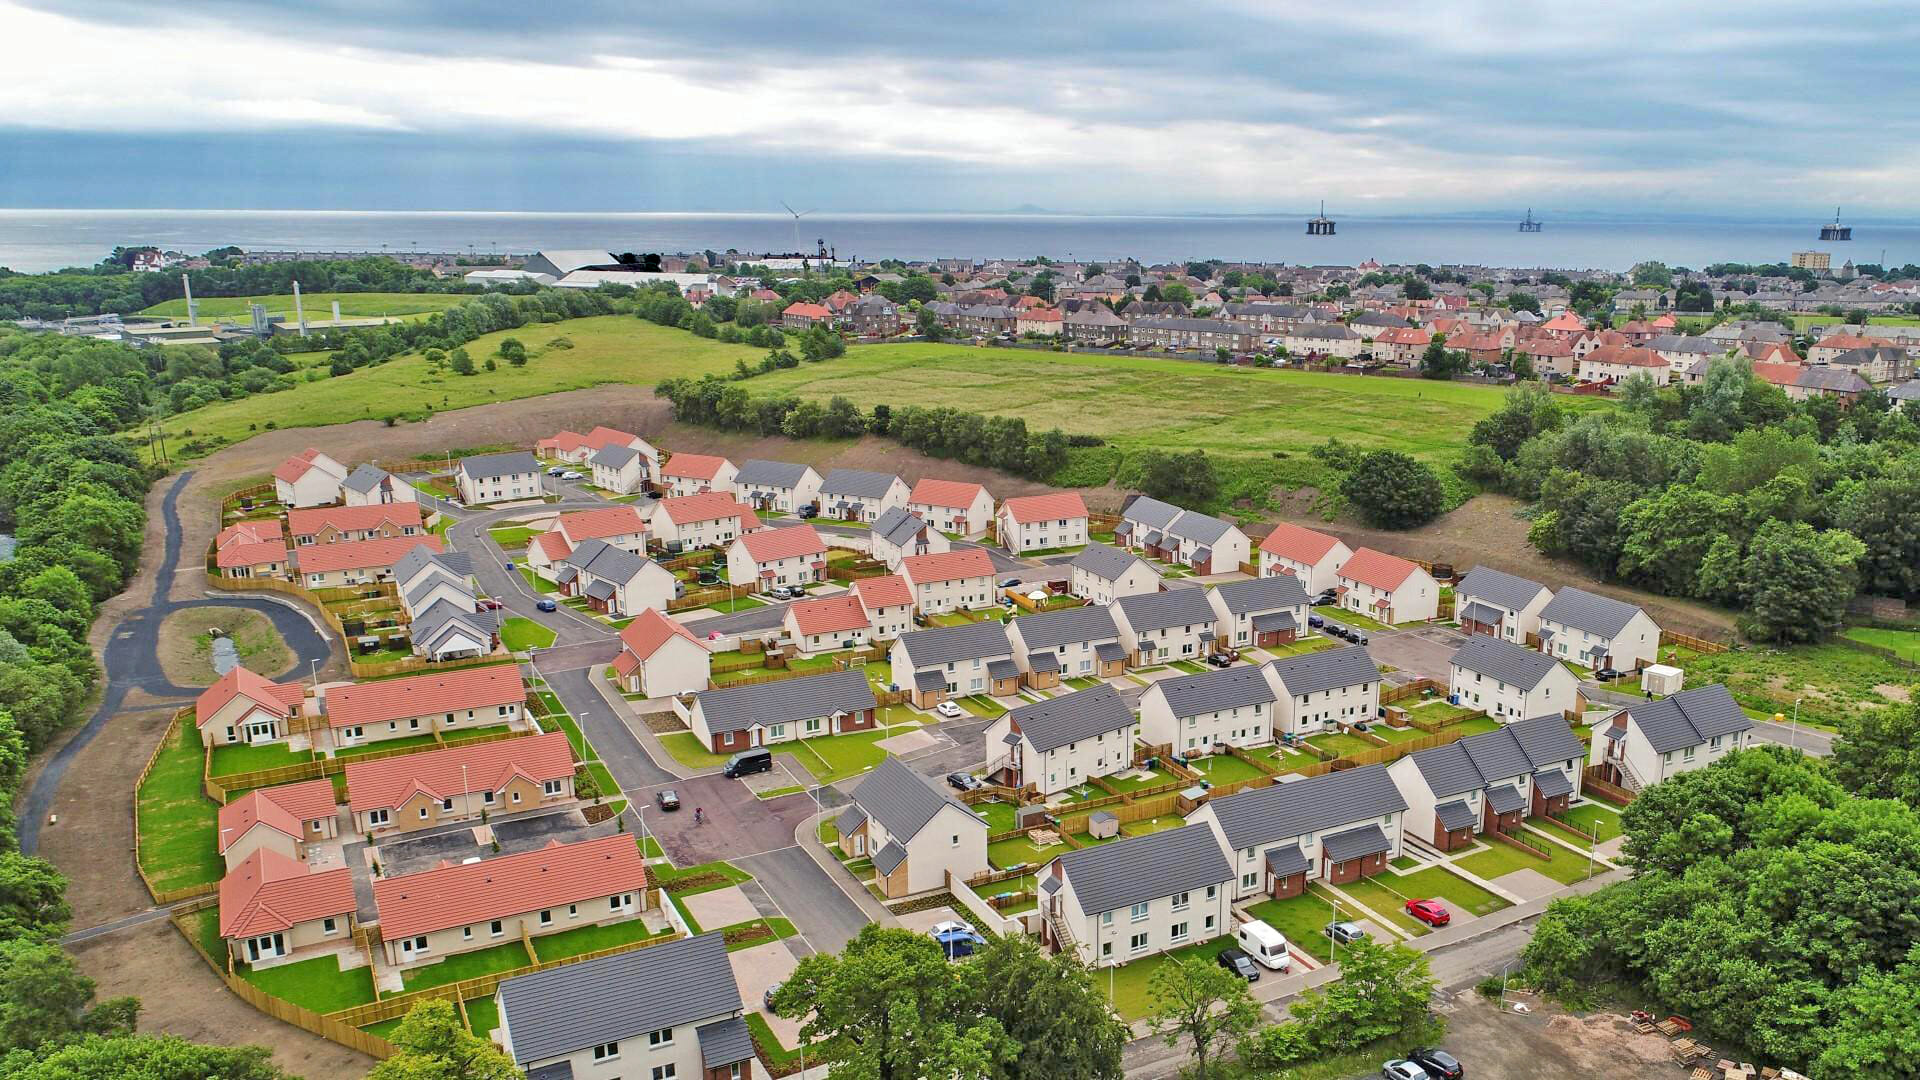 RUSSELLS HELPS TO CEMENT SOCIAL HOUSING PLANS IN SCOTLAND @RussellRoofTile